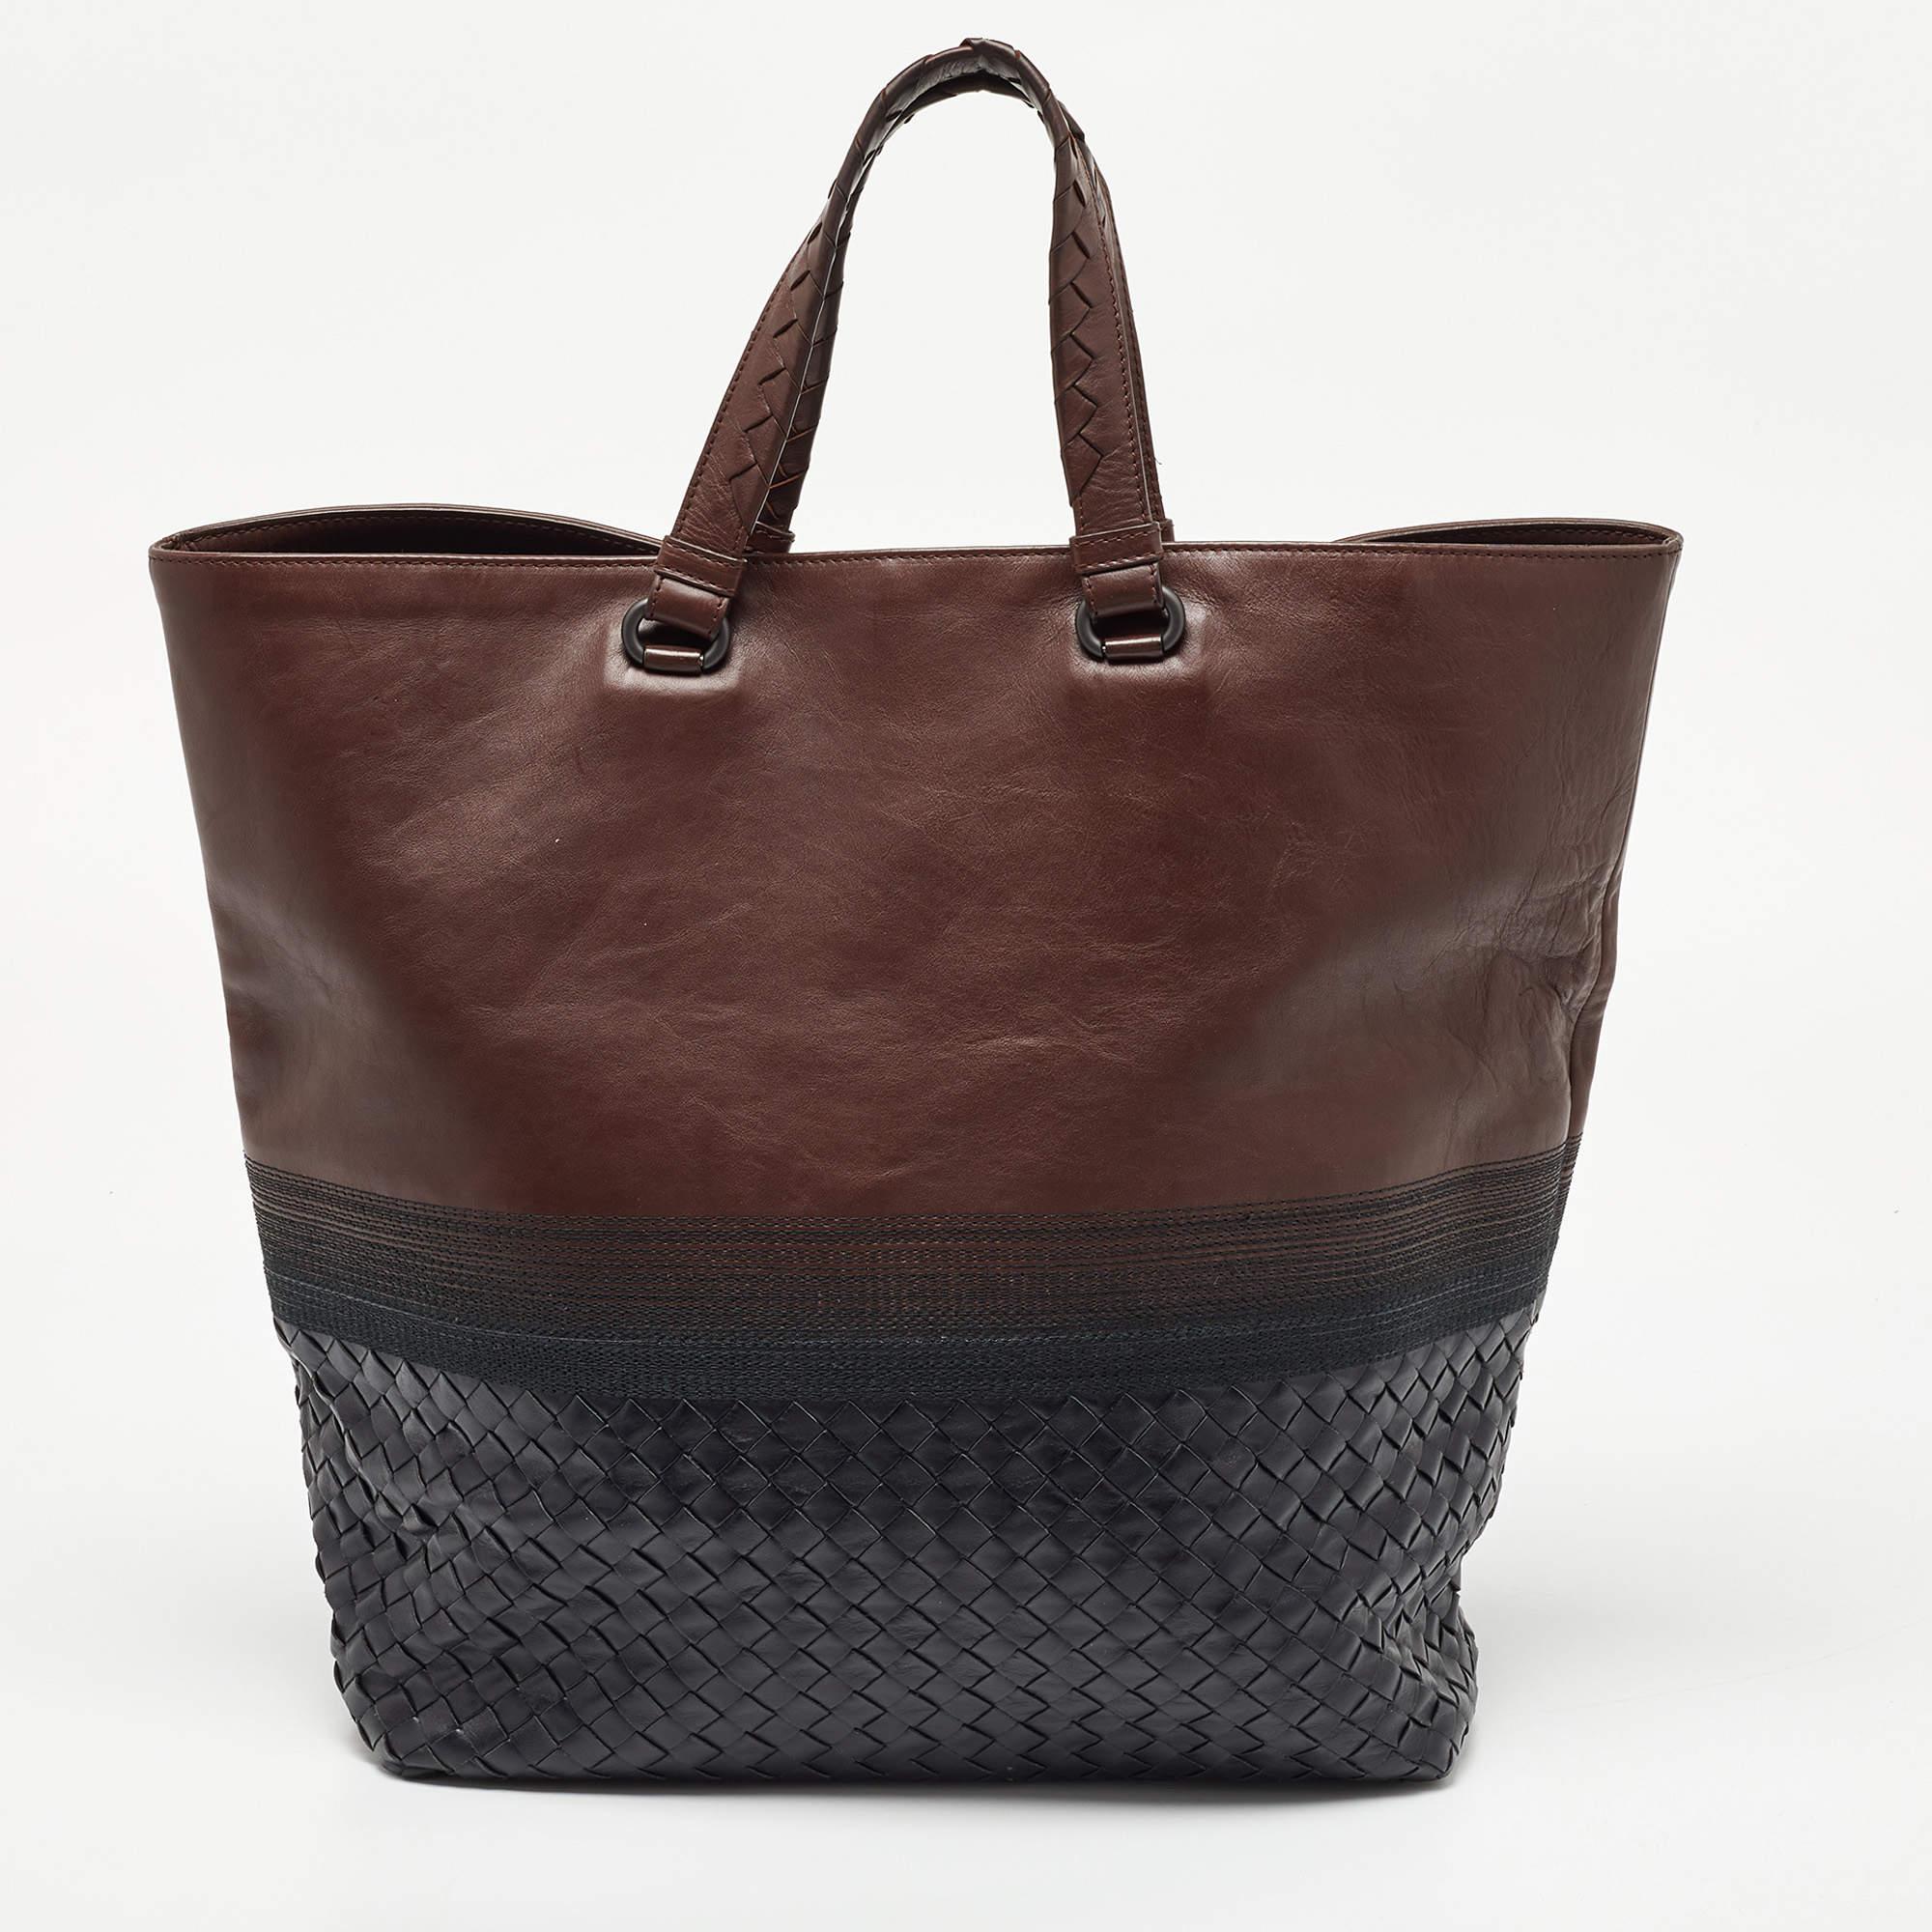 Thoughtful details, high quality, and everyday convenience mark this Bottega Veneta Intrecciato bag for women. The bag is sewn with skill to deliver a refined look and an impeccable finish.

Includes: Info Booklet